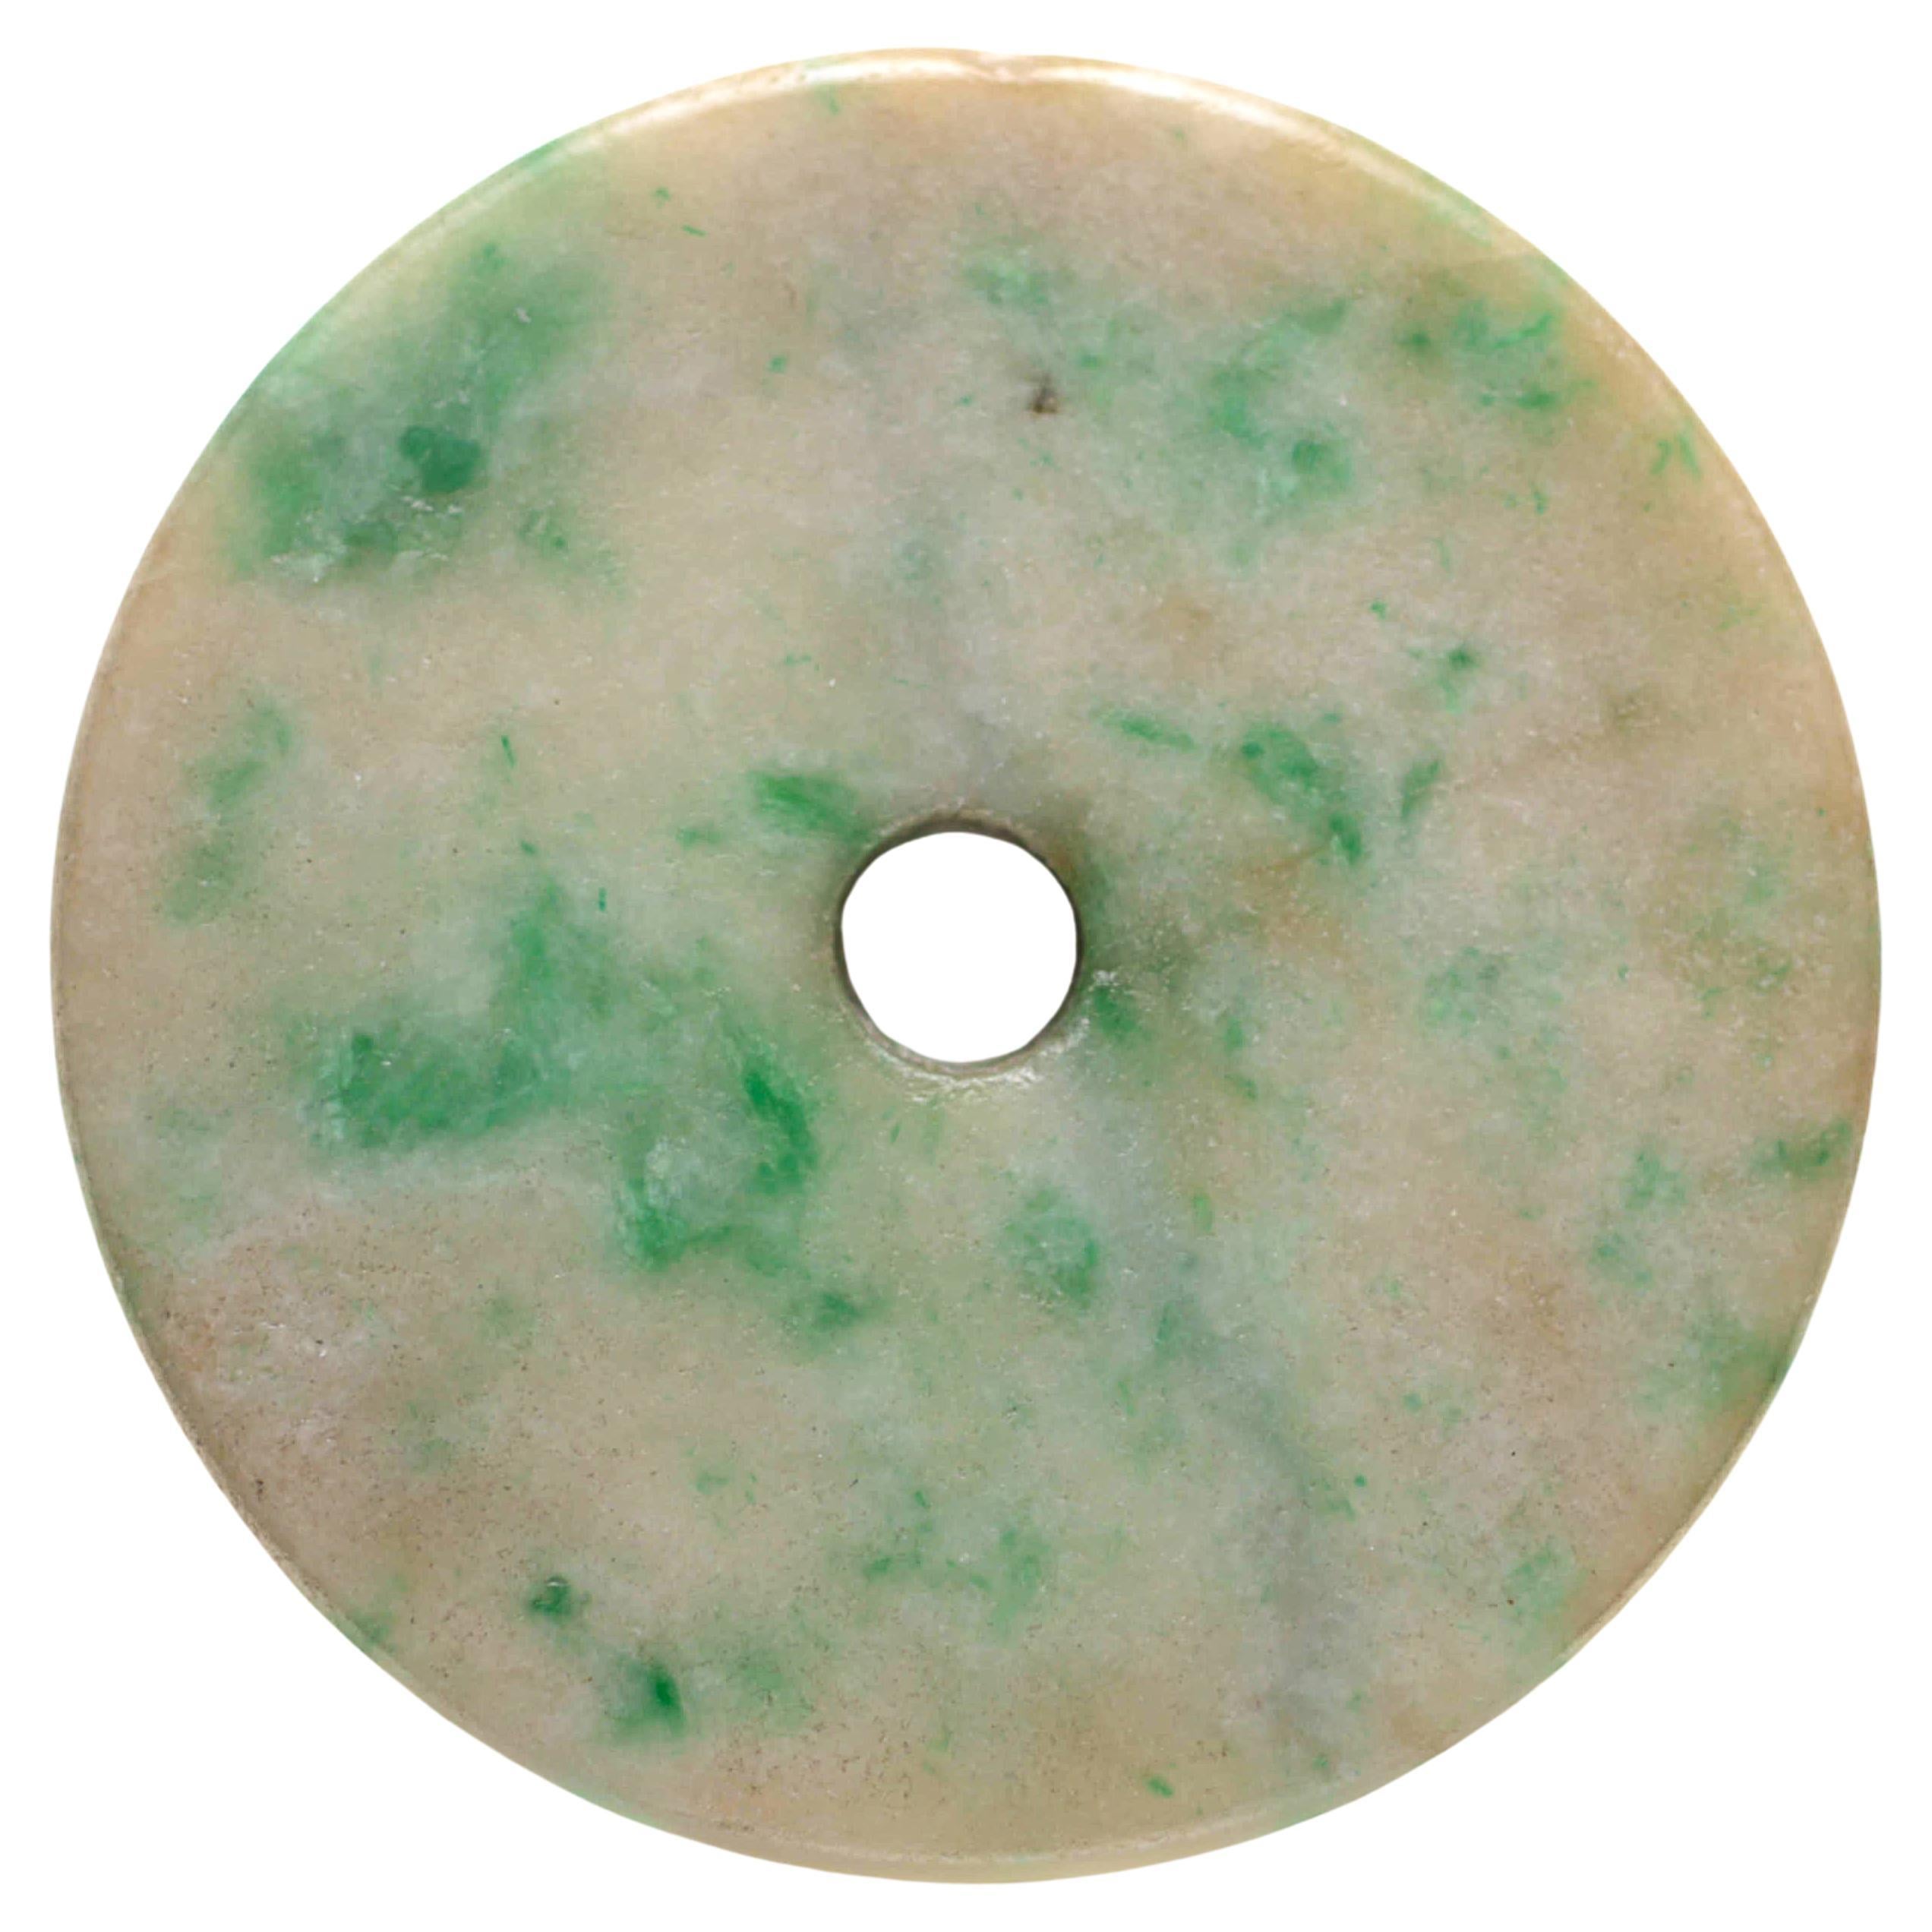 Chinese Antique Jade Pi Disk Circa 1820-1850 Certified Untreated